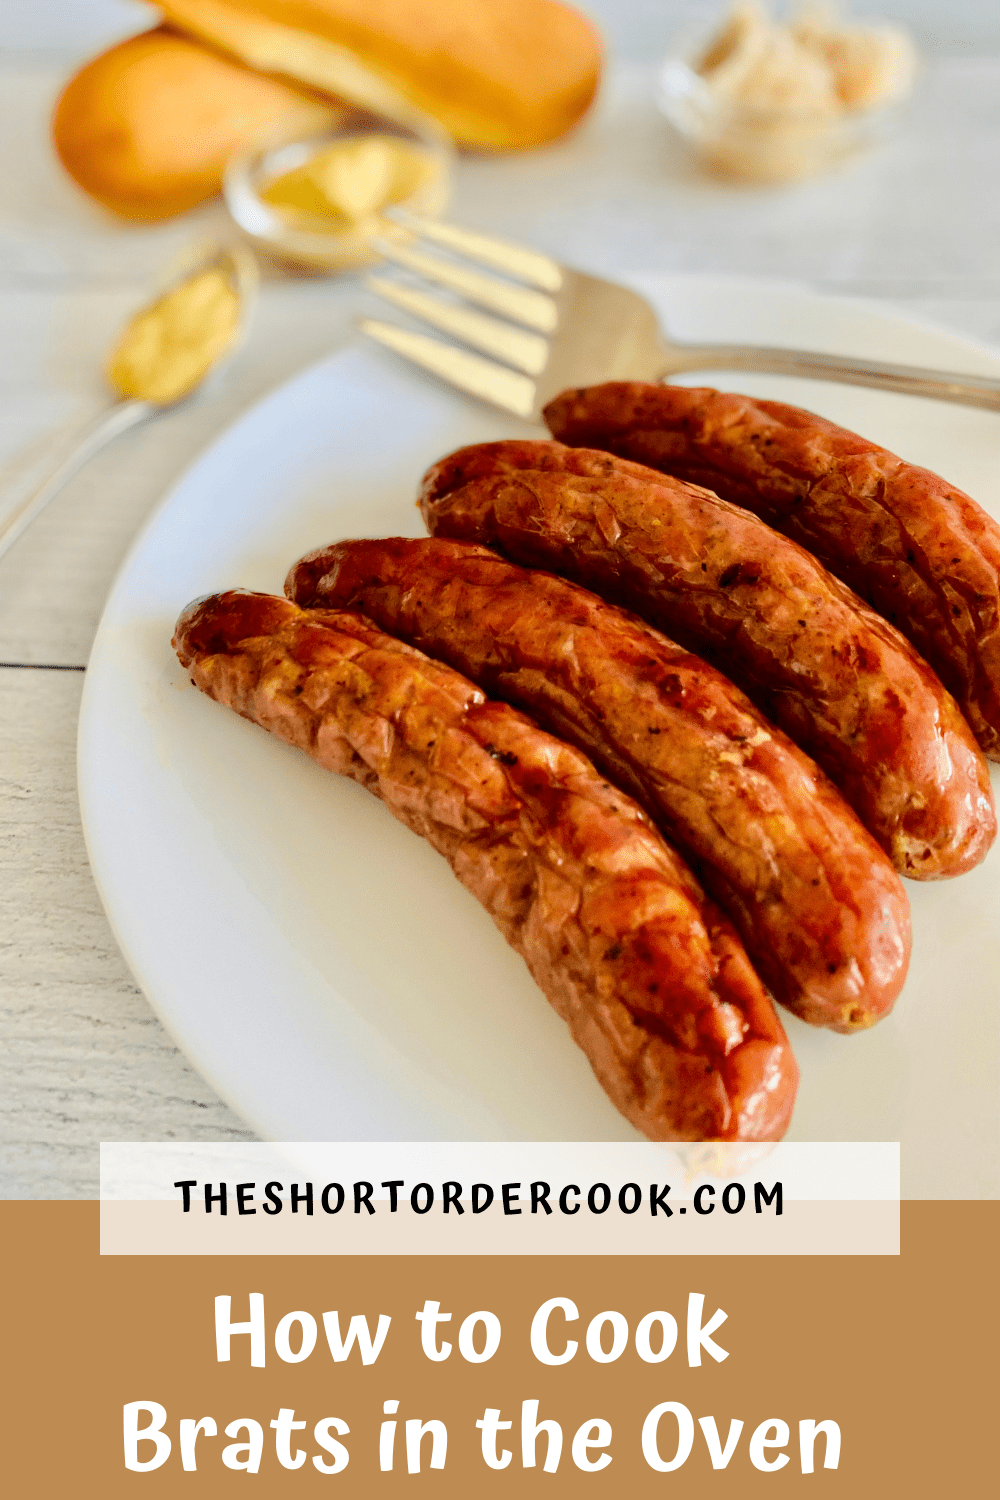 4 oven cooked bratwurst links ready to eat with buns, mustard, and sauerkraut on the table